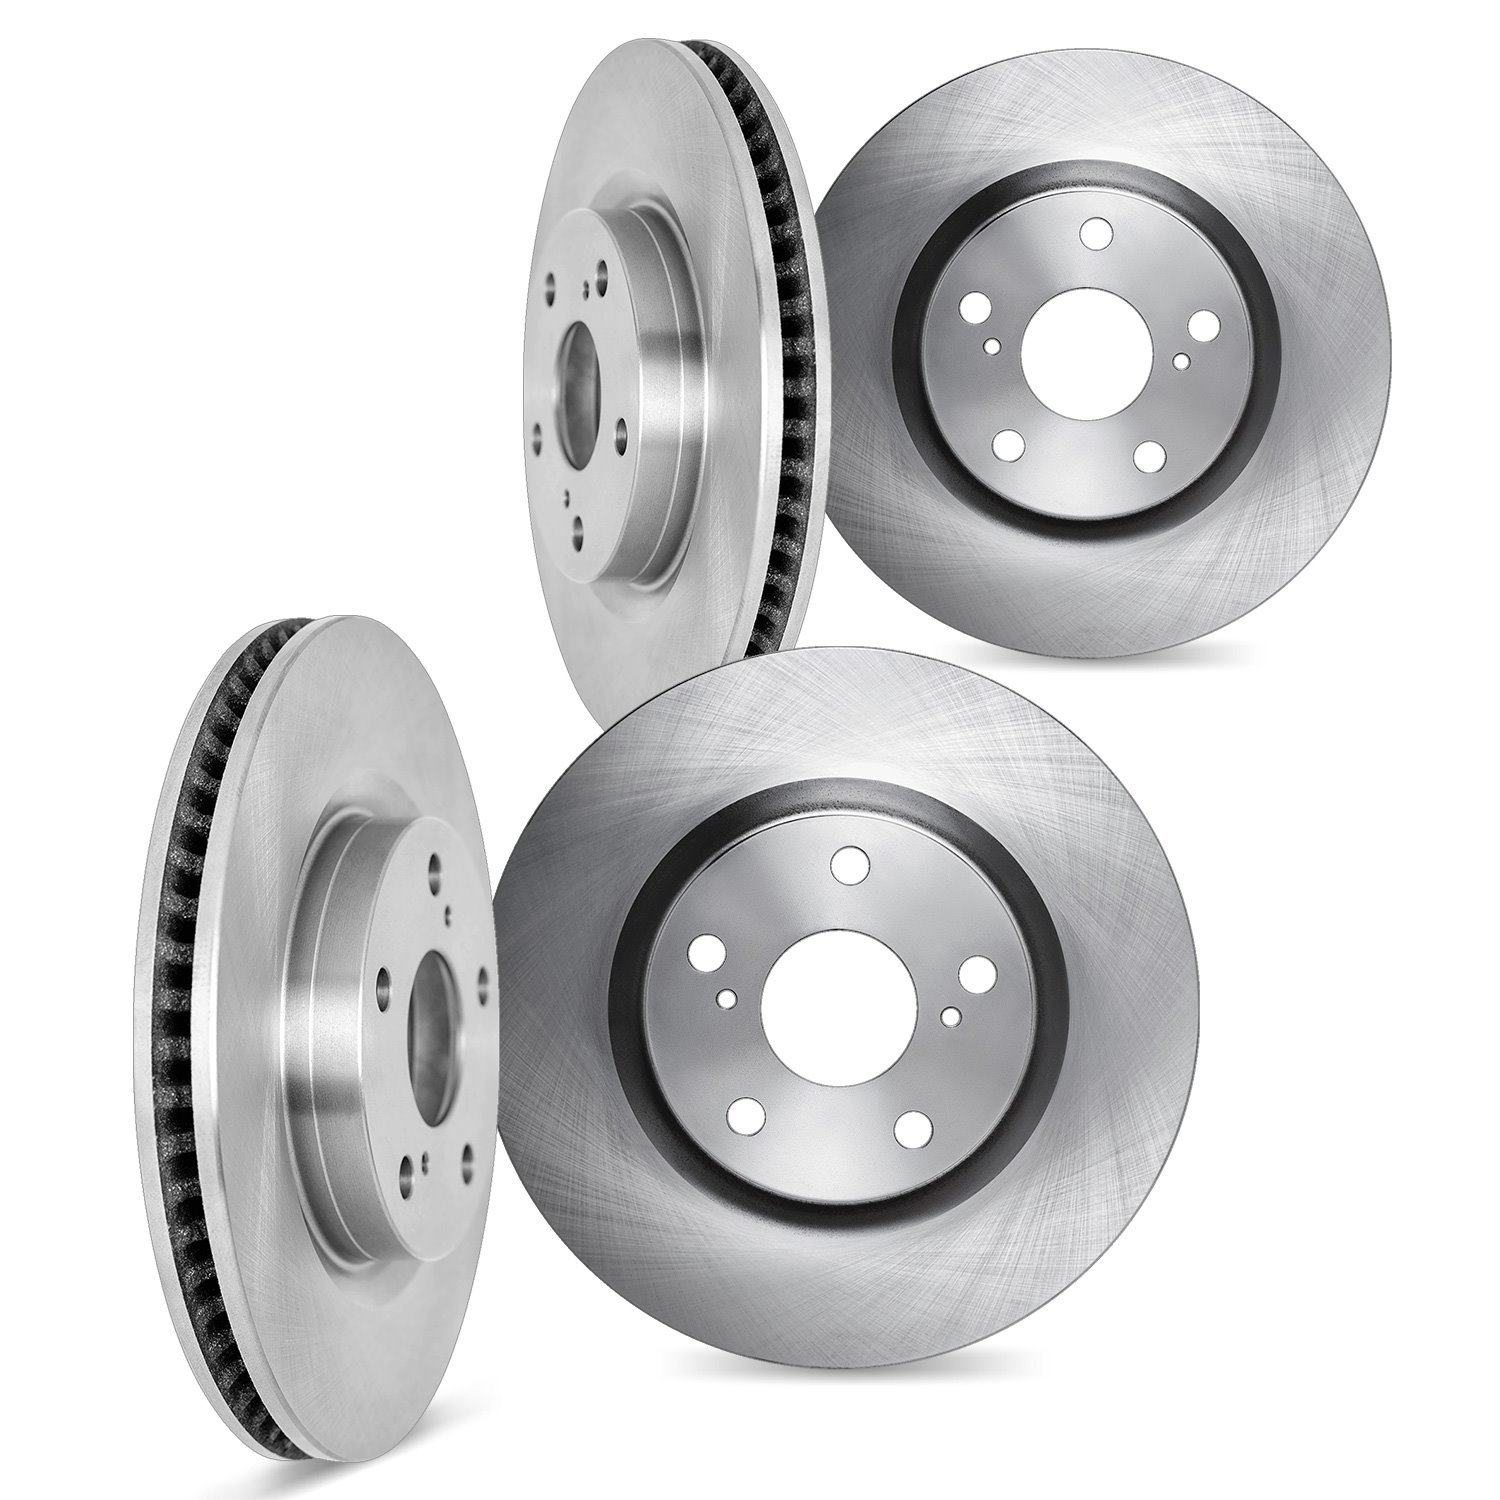 6004-11019 Brake Rotors, Fits Select Land Rover, Position: Front and Rear